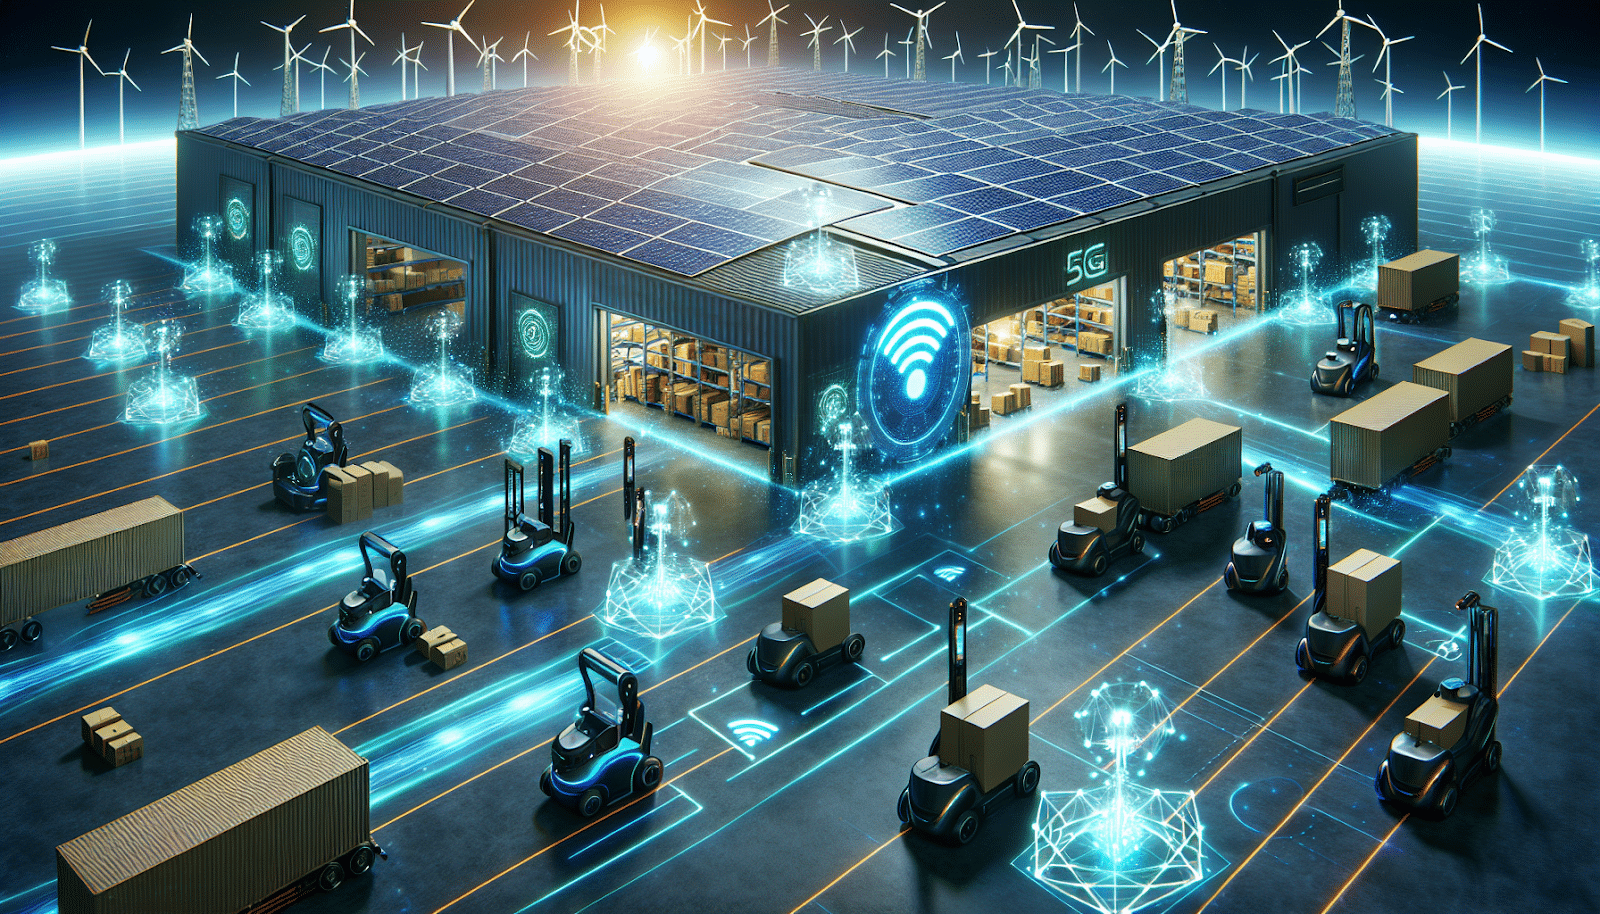 Future trends in warehouse automation including AI, 5G connectivity, and sustainability